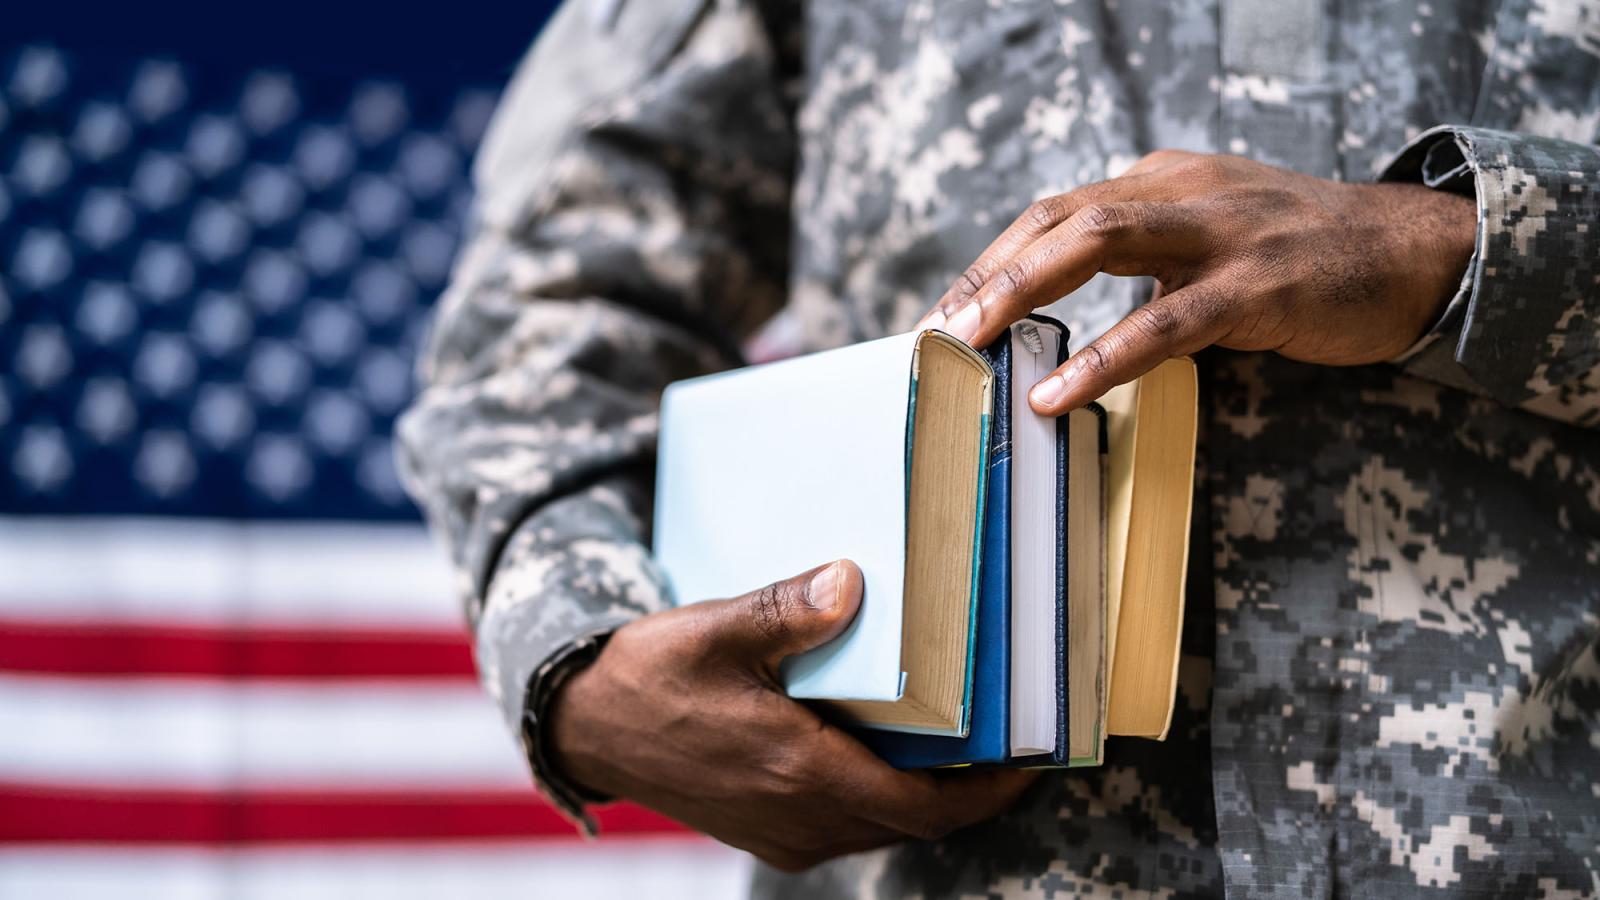 A man wearing a military uniform stands in front of an American flag while holding several books